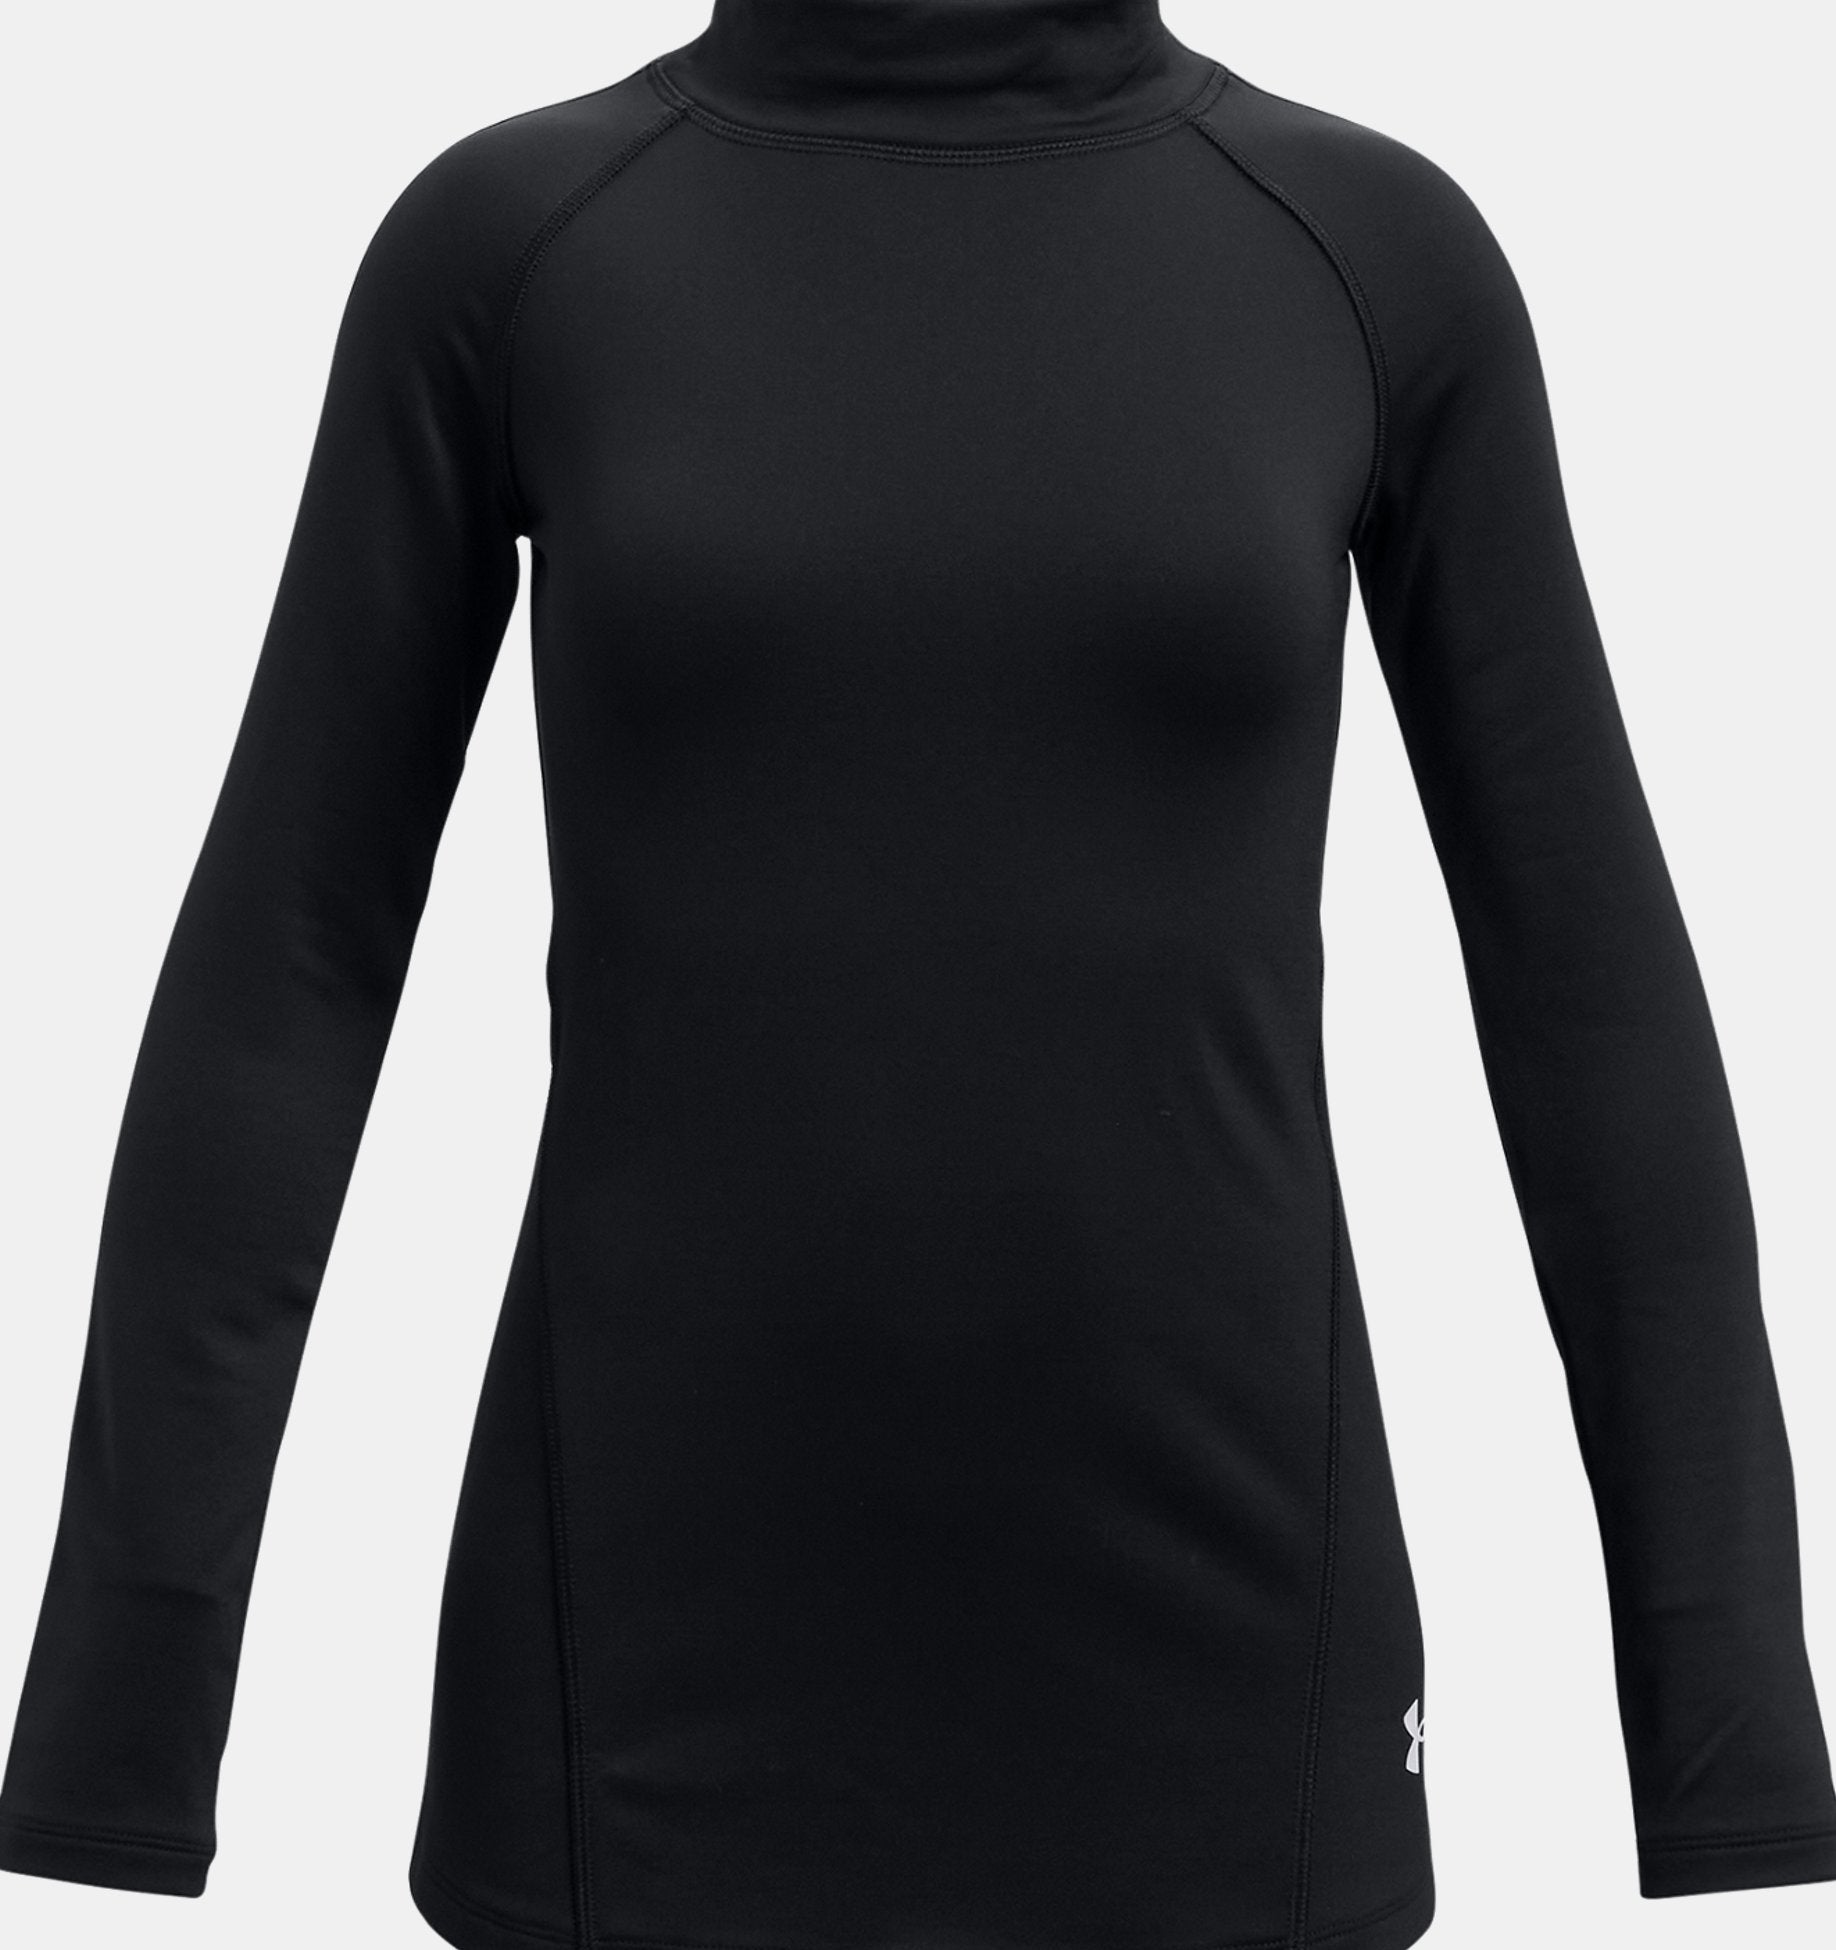  Womens Cold Gear Under Armour